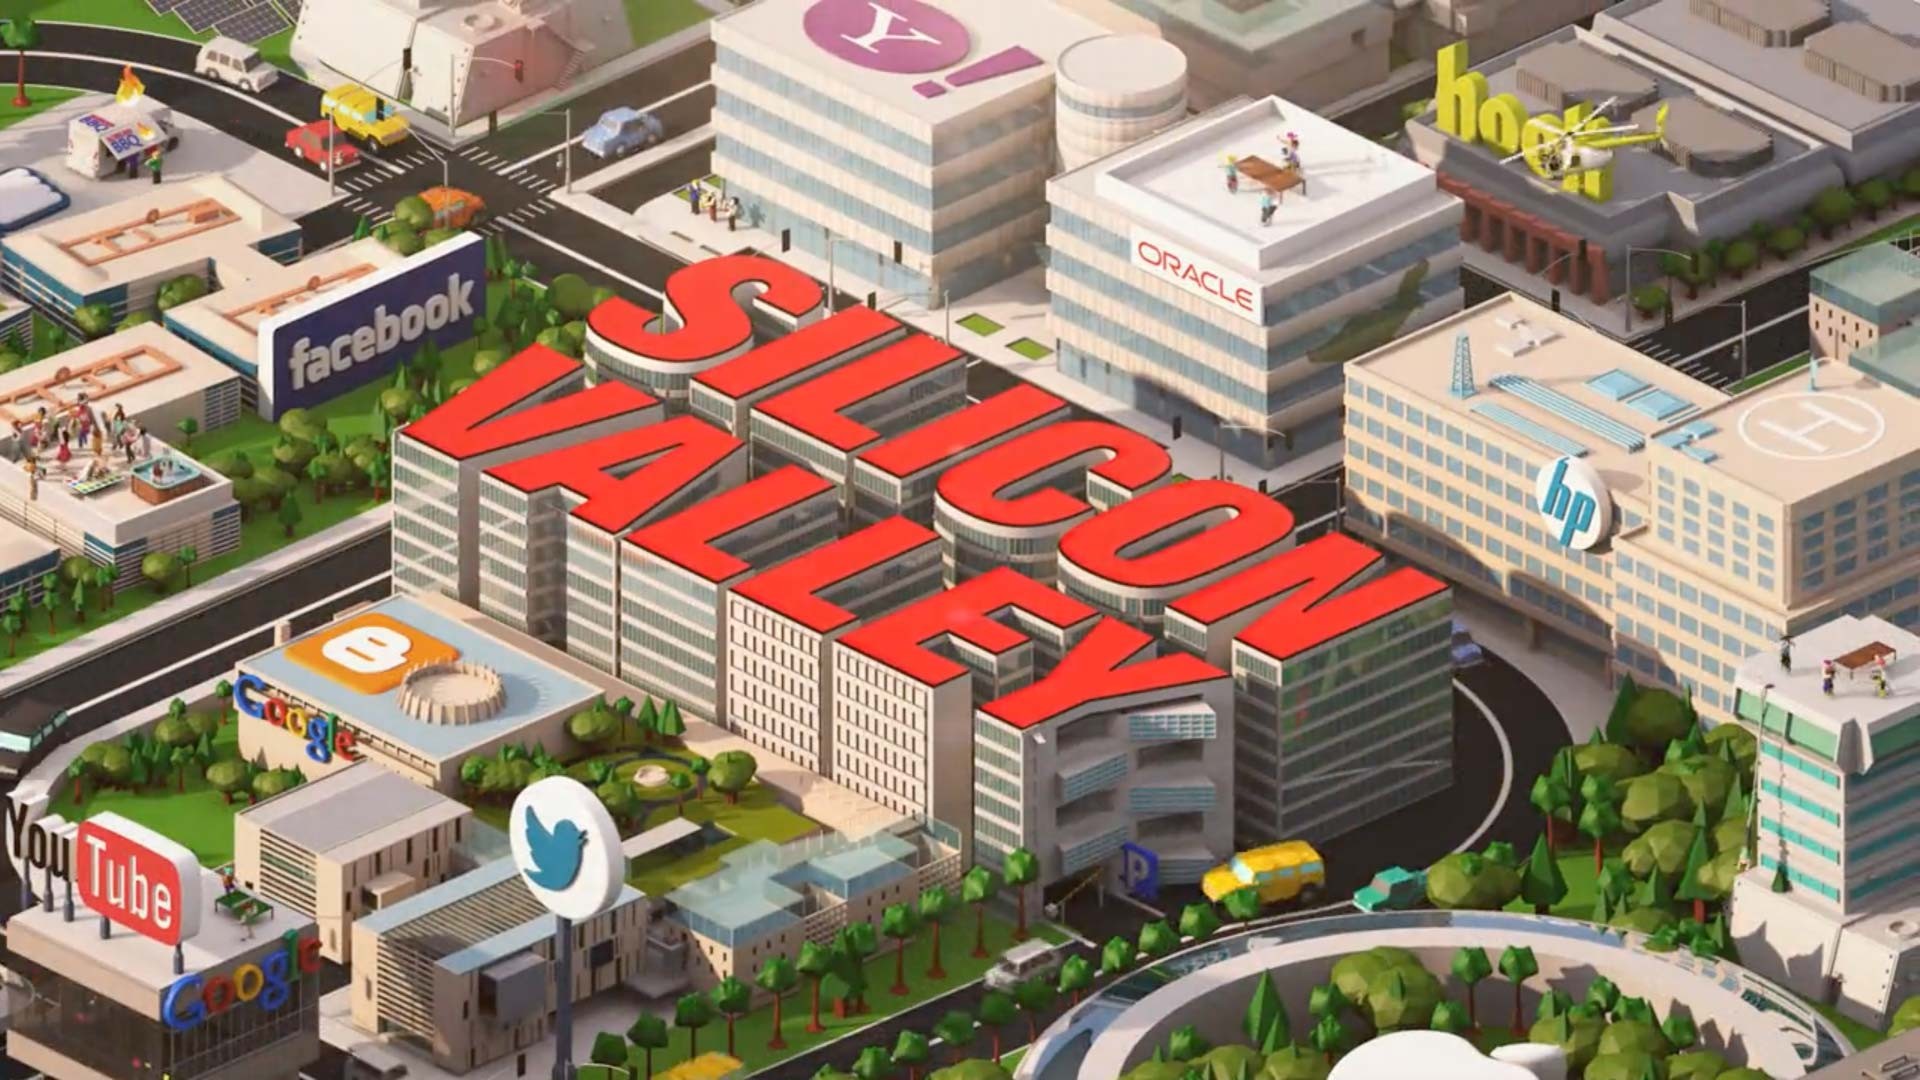 General 1920x1080 Silicon Valley HBO CGI TV series